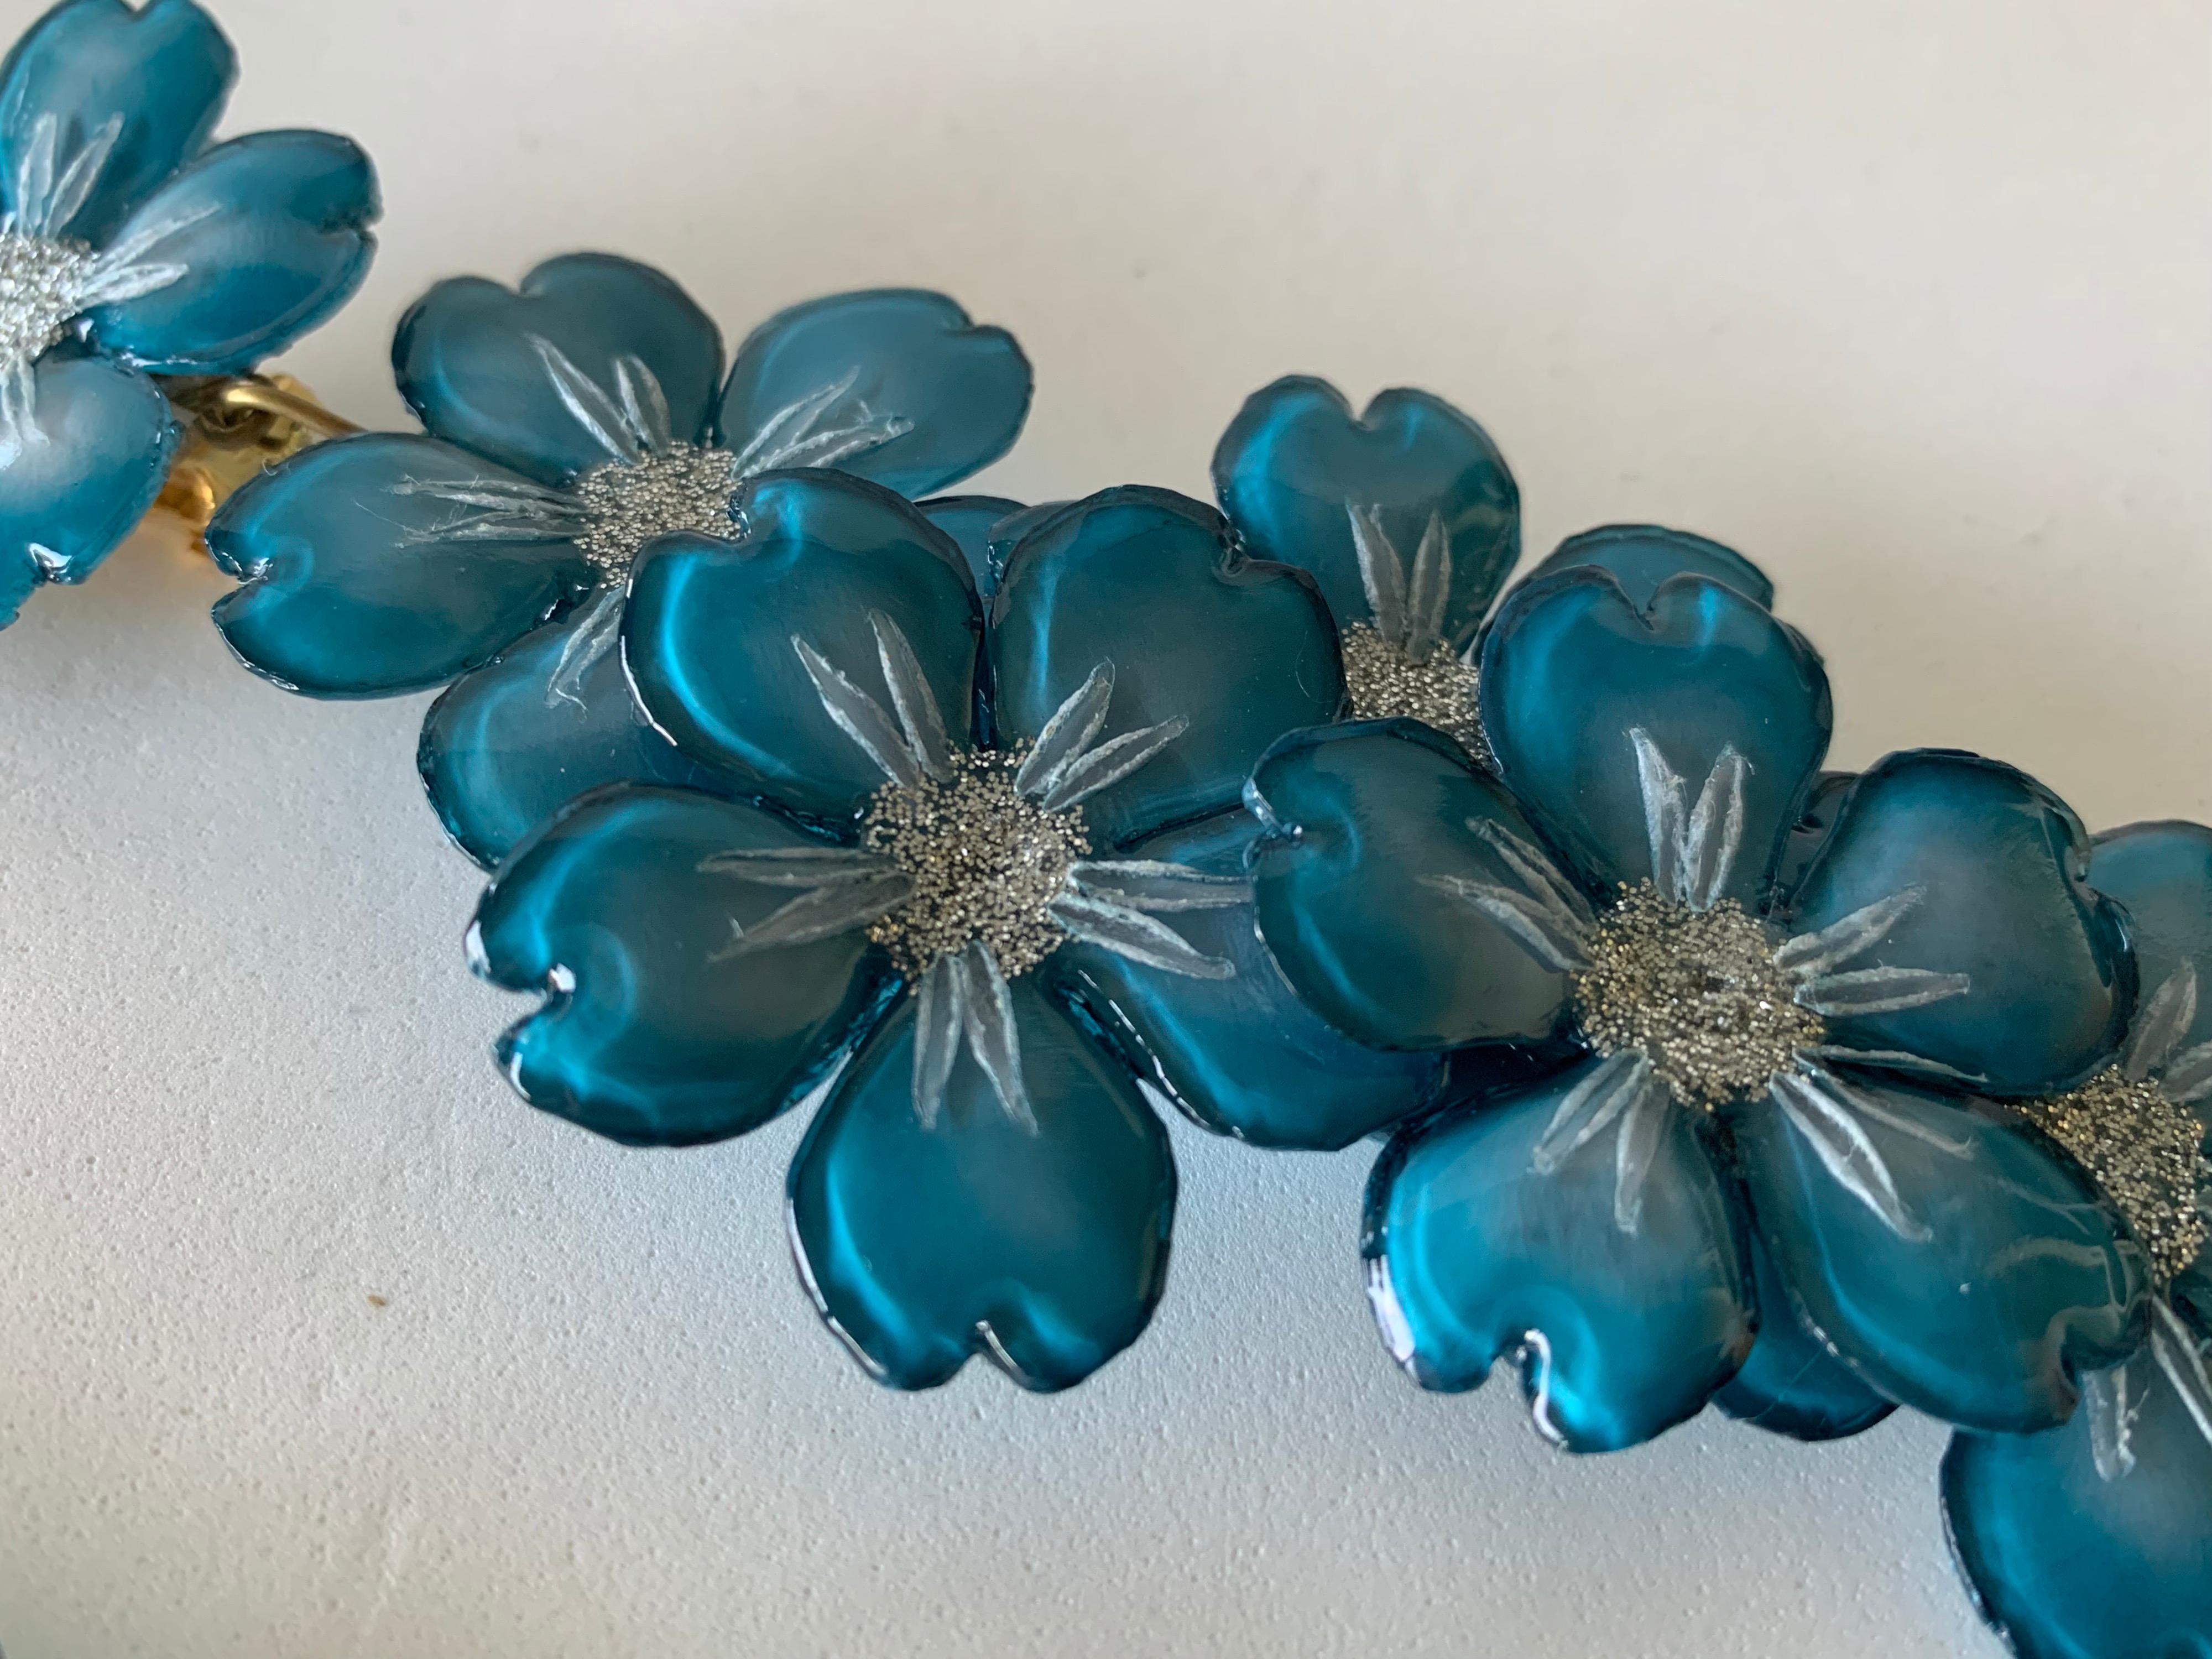 Contemporary  Blue and Silver Flower Chandelier Statement Earrings  5